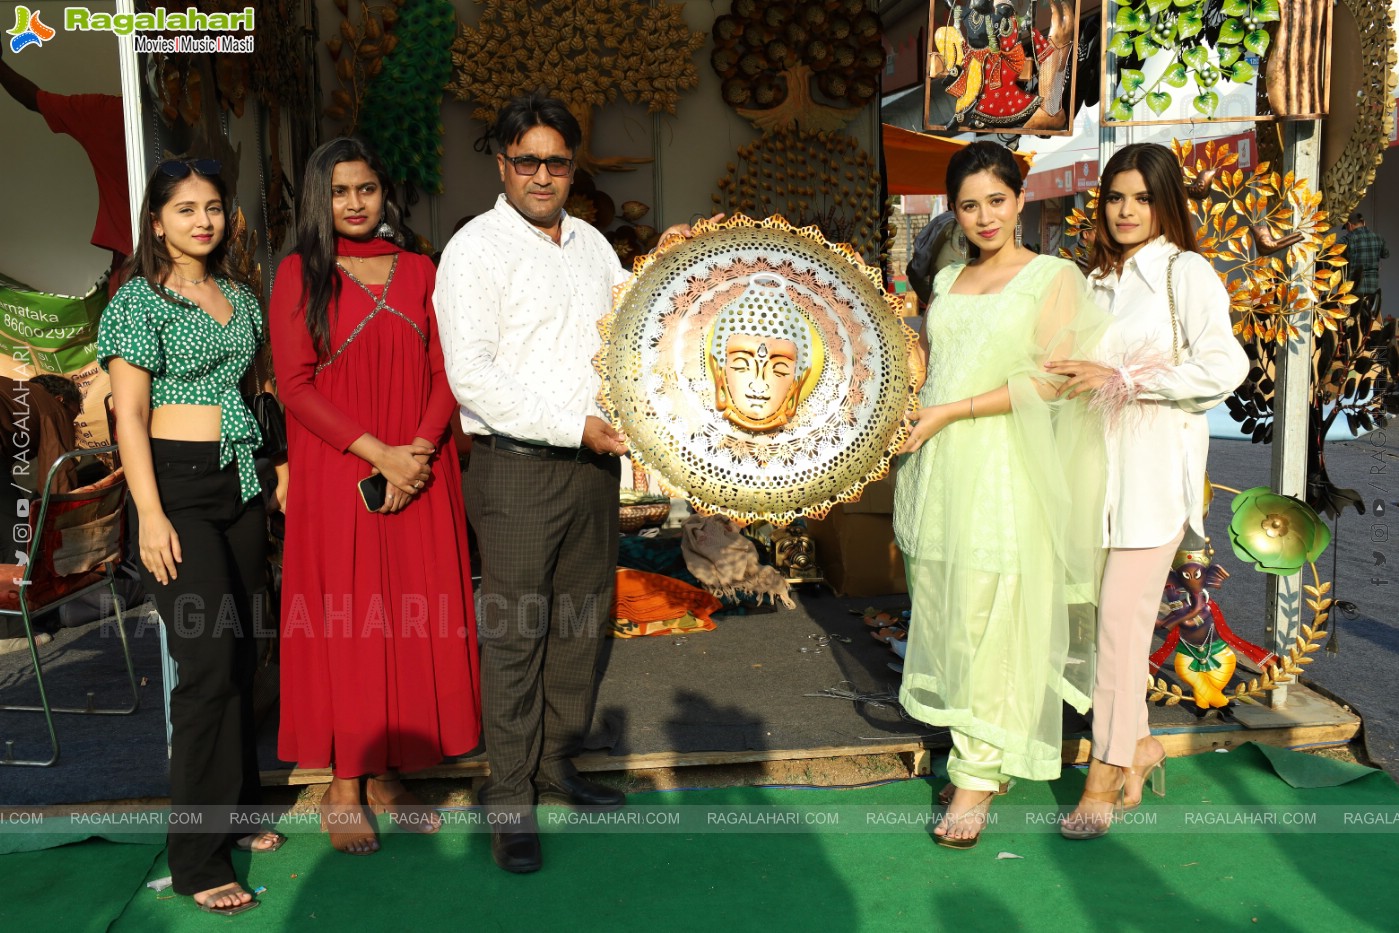 Grand Launch of Hunar Mahotsav- An Exhibition Showcasing Crafts, Cuisine, Culture of India